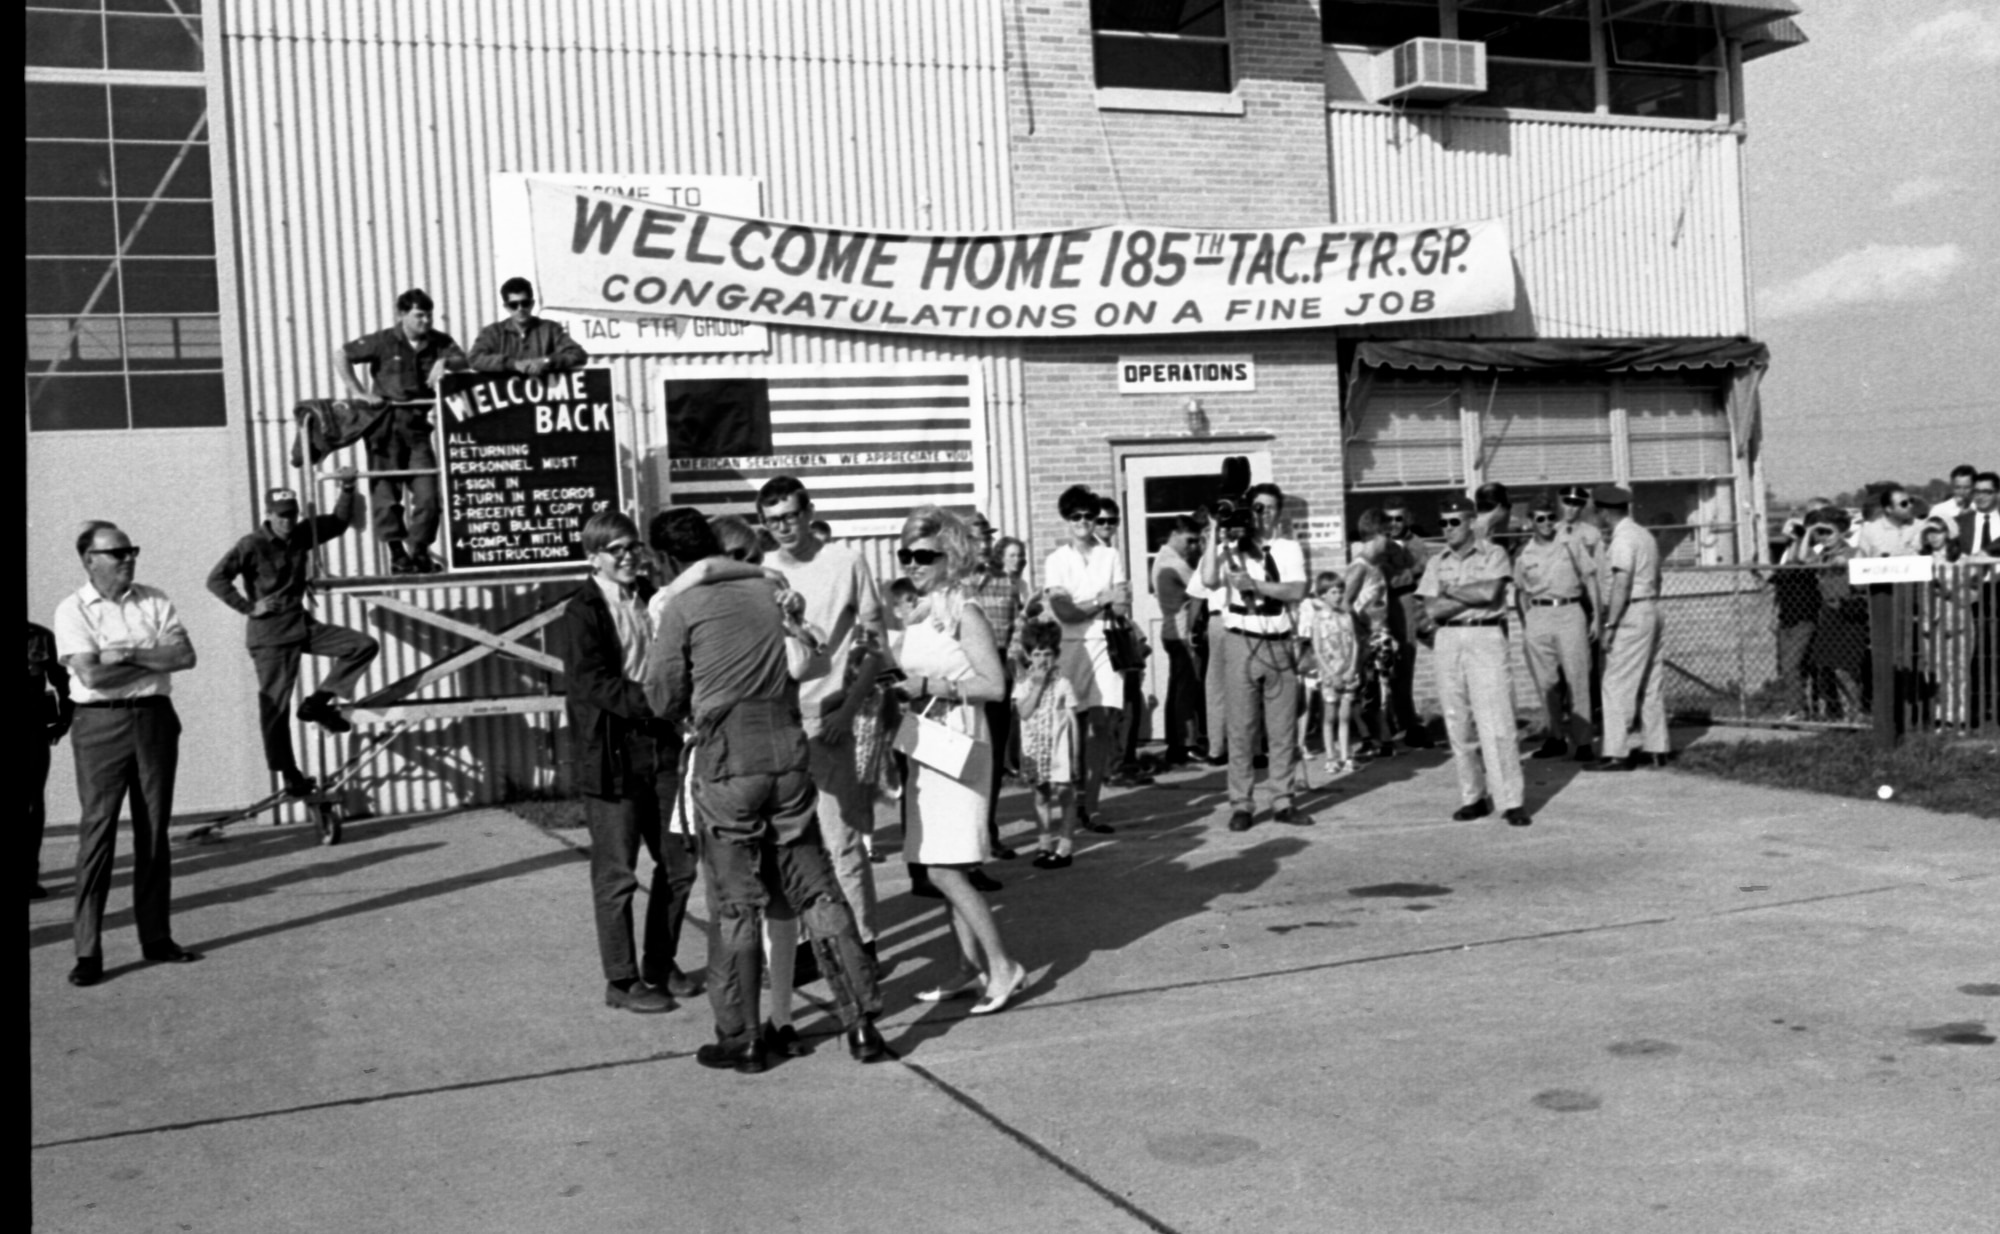 F-100 Pilots assigned to the 185th Tactical Fighter group are greeted by family members and well-wishers at the Air National Guard facility in Sioux City, Iowa on May 14, 1969 as they return from a yearlong activation at Phu Cat Airbase, South Vietnam. (U.S. Air National Guard photo/released 185th TFG Photo)